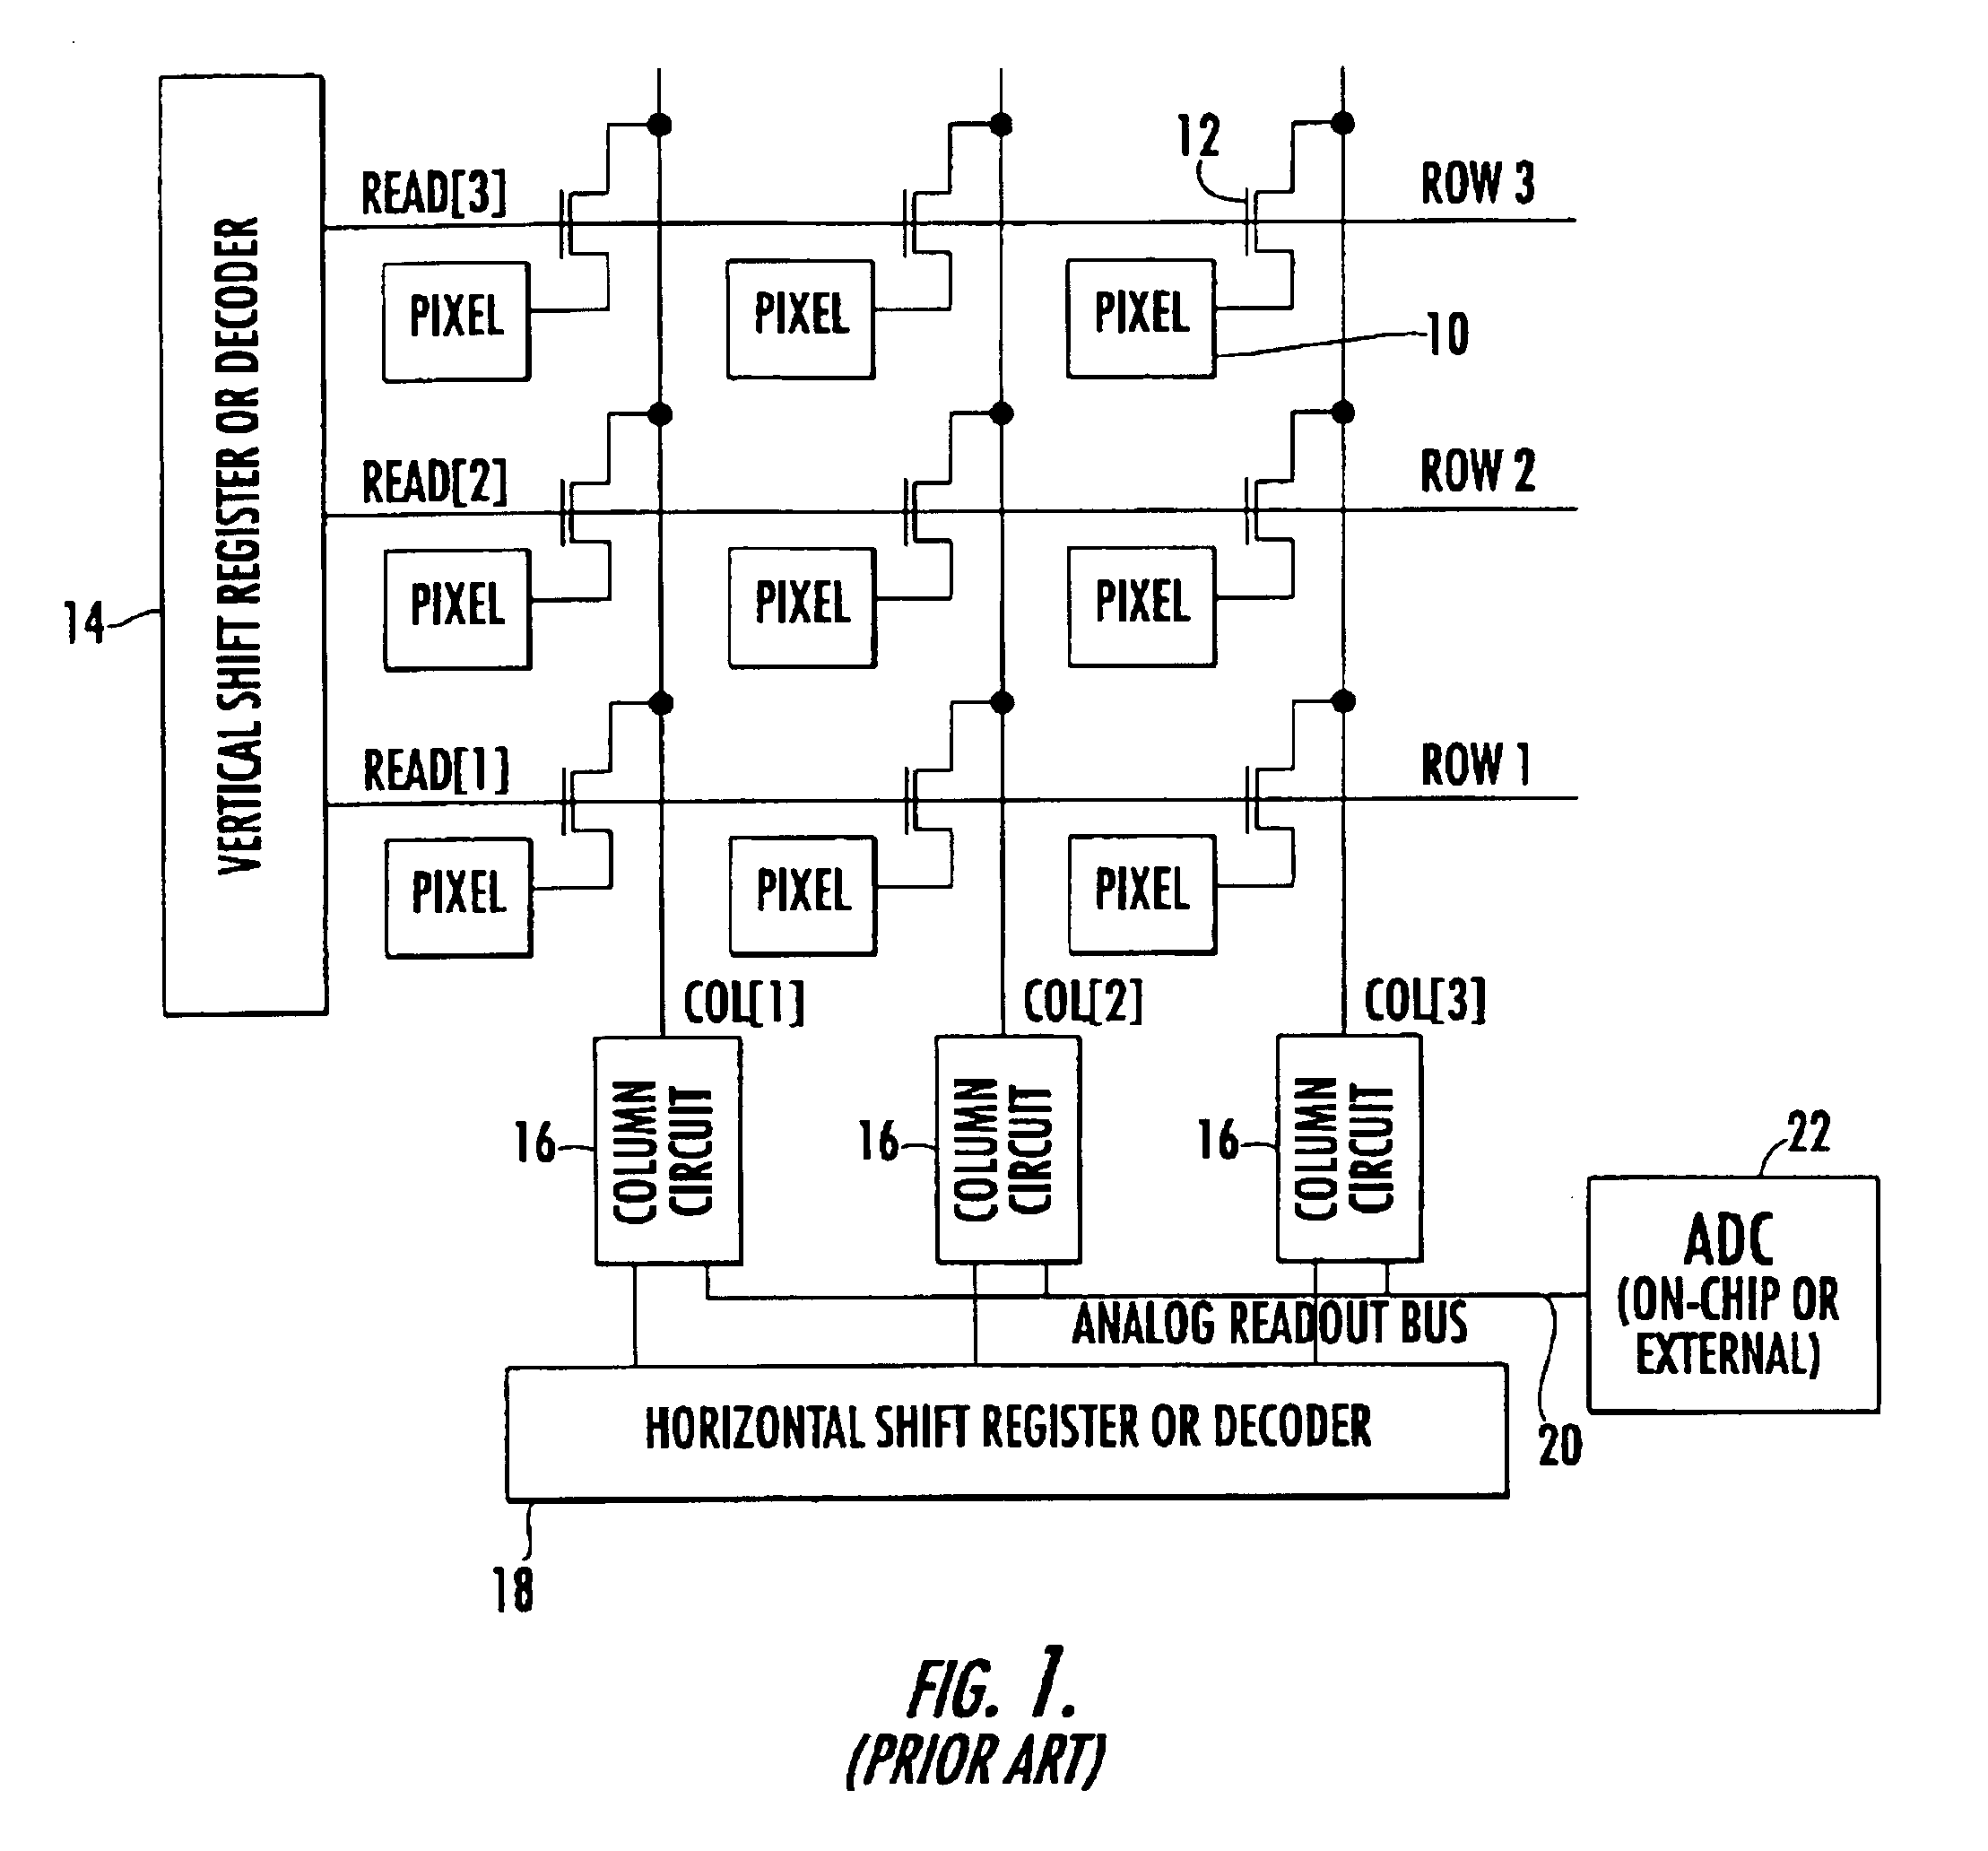 Modification of column fixed pattern column noise in solid state image sensors